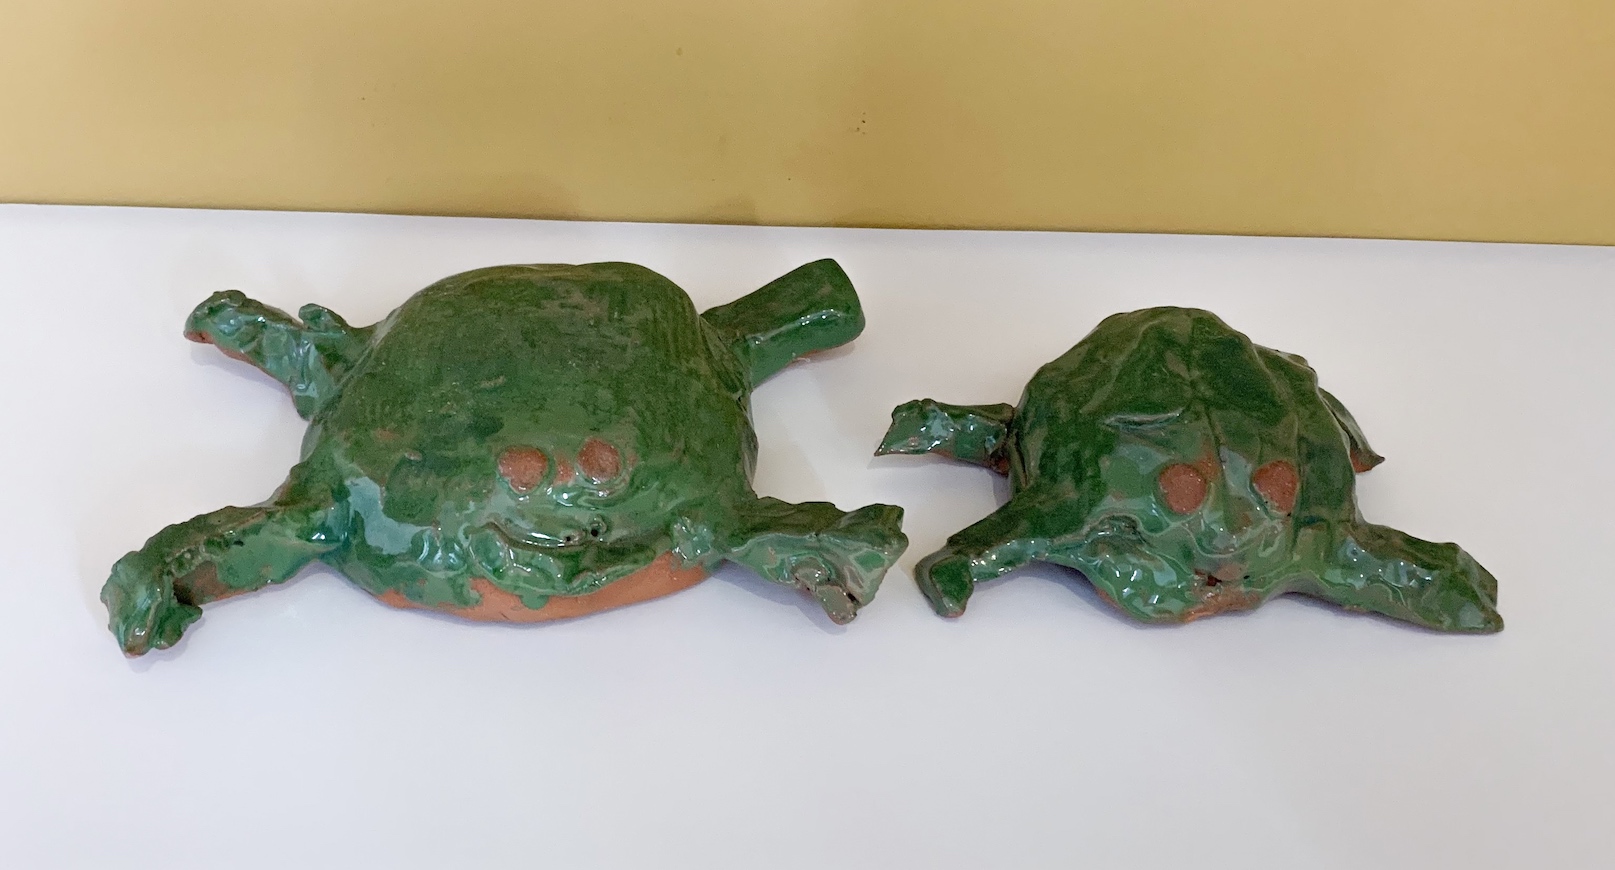 Artwork titled 'Frogs' on 2014